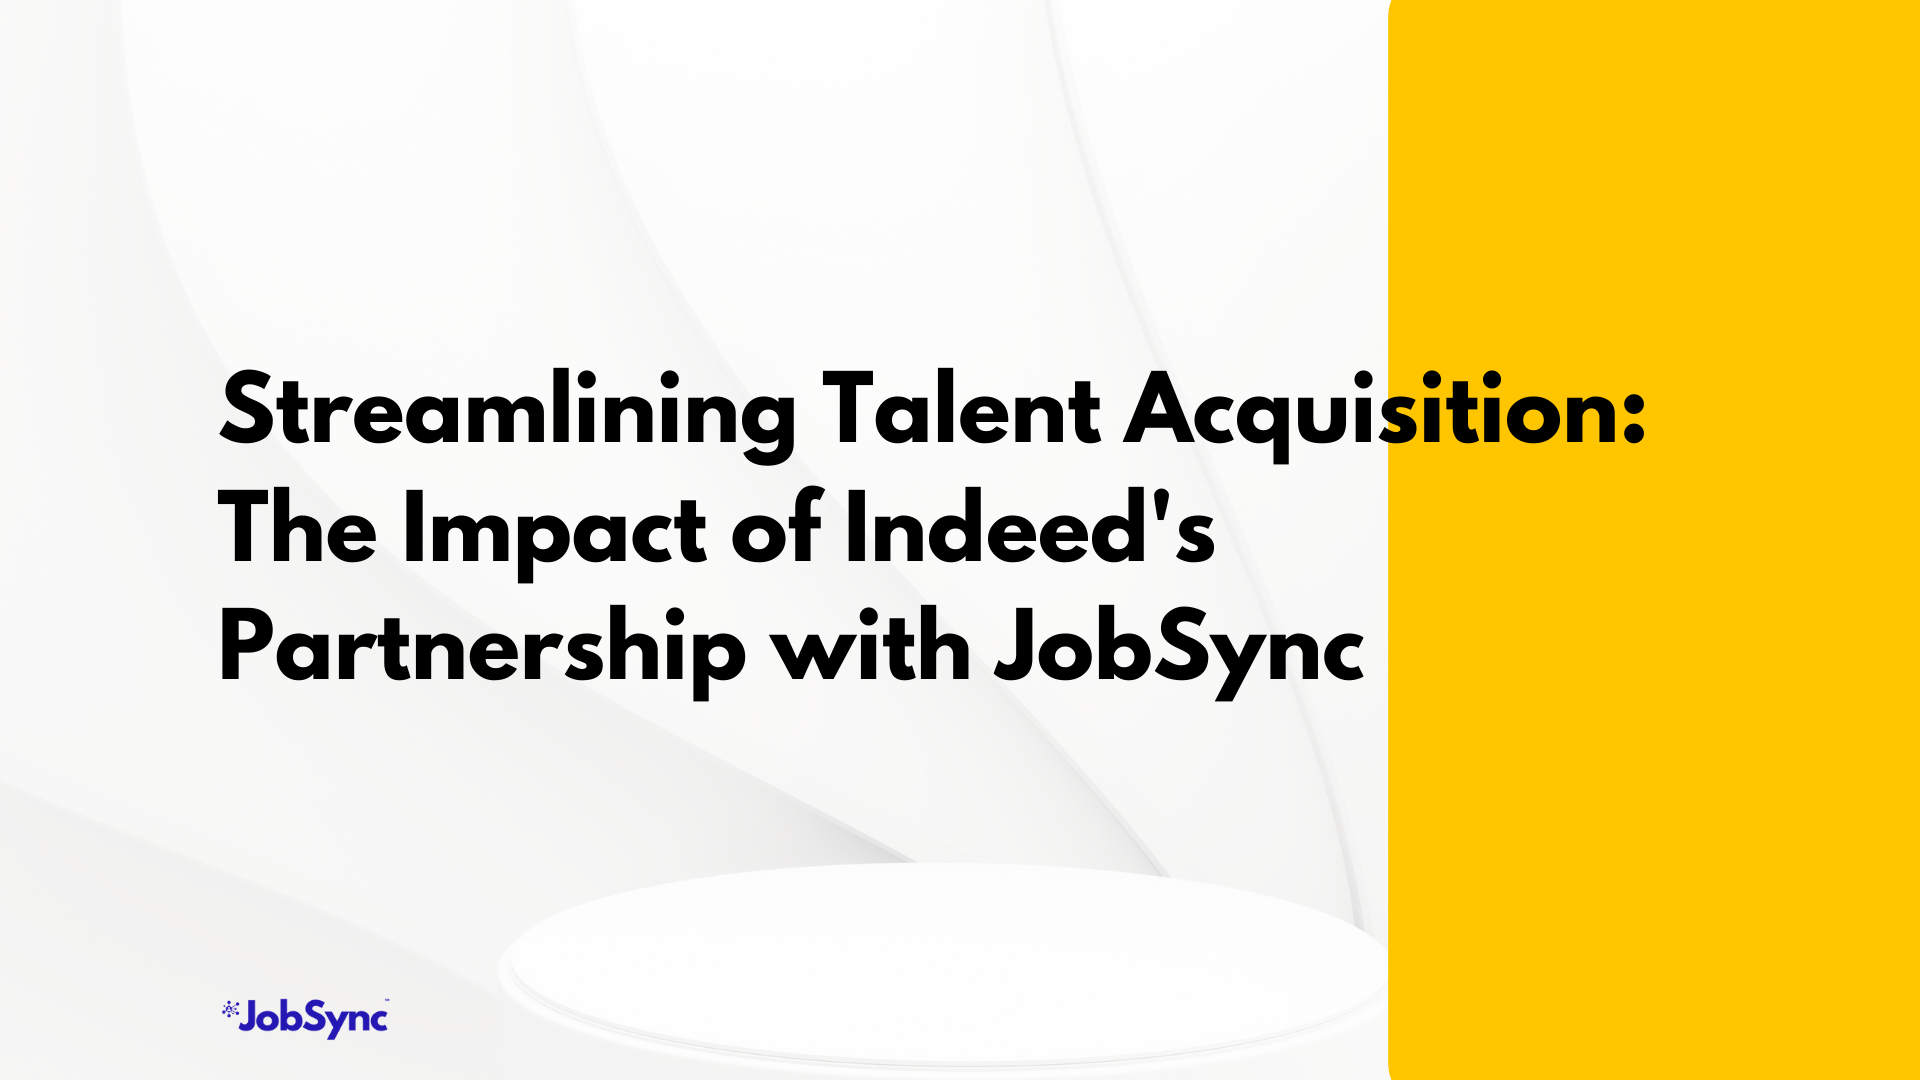 Streamlining Talent Acquisition: The Impact of Indeed's Partnership with JobSync